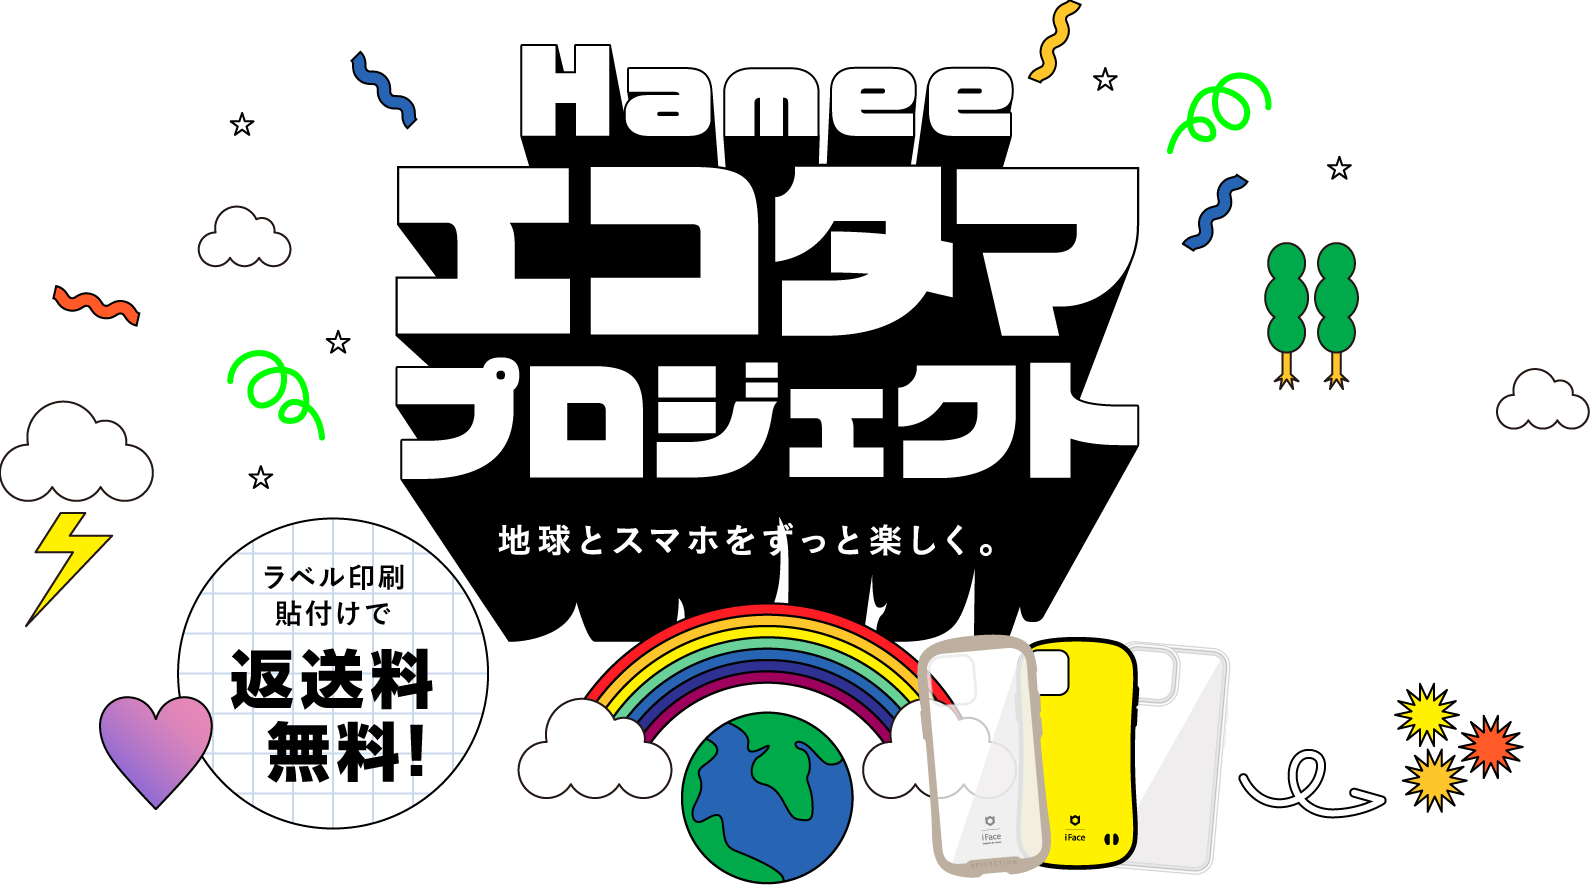 Hamee ECO魂 プロジェクト 地球とスマホをずっと楽しく。